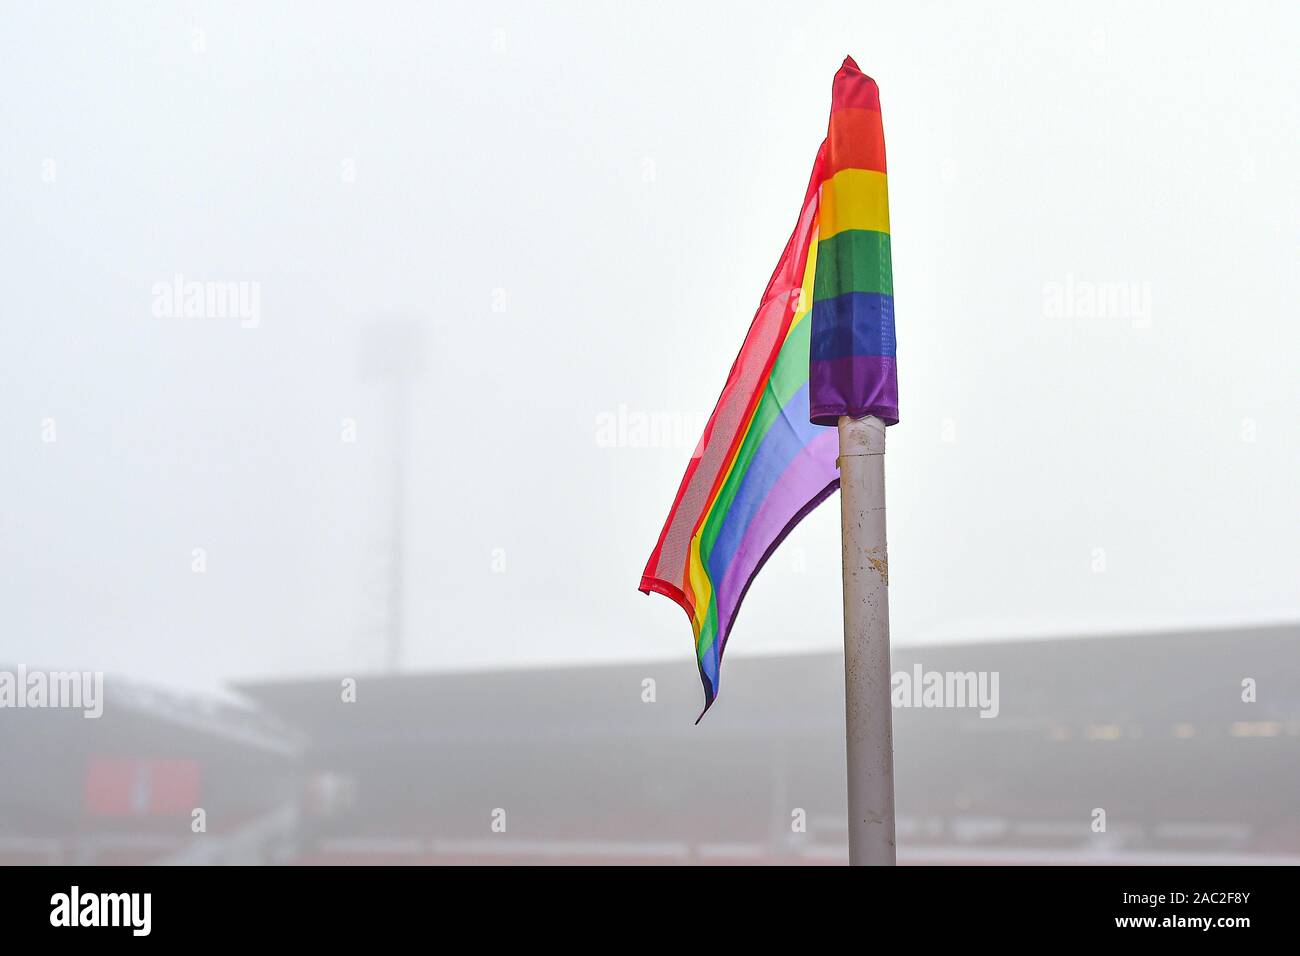 Nottingham, UK. 30th Nov, 2019. Corner flag in rainbow colours showing support for the LBGT community during the Sky Bet Championship match between Nottingham Forest and Cardiff City at the City Ground, Nottingham on Saturday 30th November 2019. (Credit: Jon Hobley | MI News) Photograph may only be used for newspaper and/or magazine editorial purposes, license required for commercial use Credit: MI News & Sport /Alamy Live News Credit: MI News & Sport /Alamy Live News Credit: MI News & Sport /Alamy Live News Stock Photo